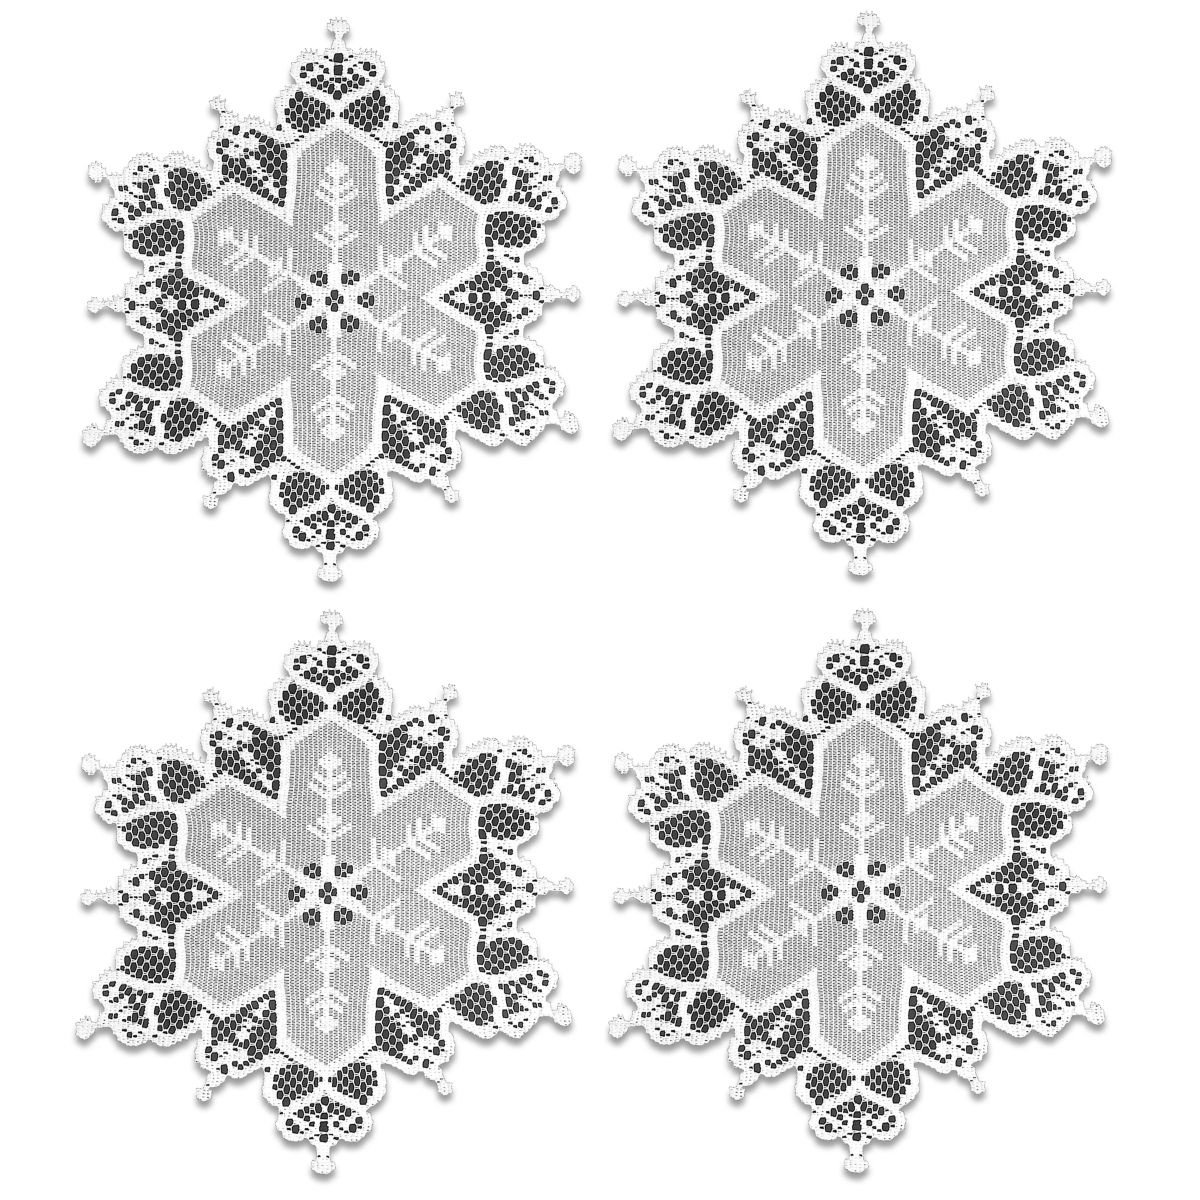 Picture of Heritage Lace SW-0900W-S Snowflake 9 in. Round Doily - White - Set of 4